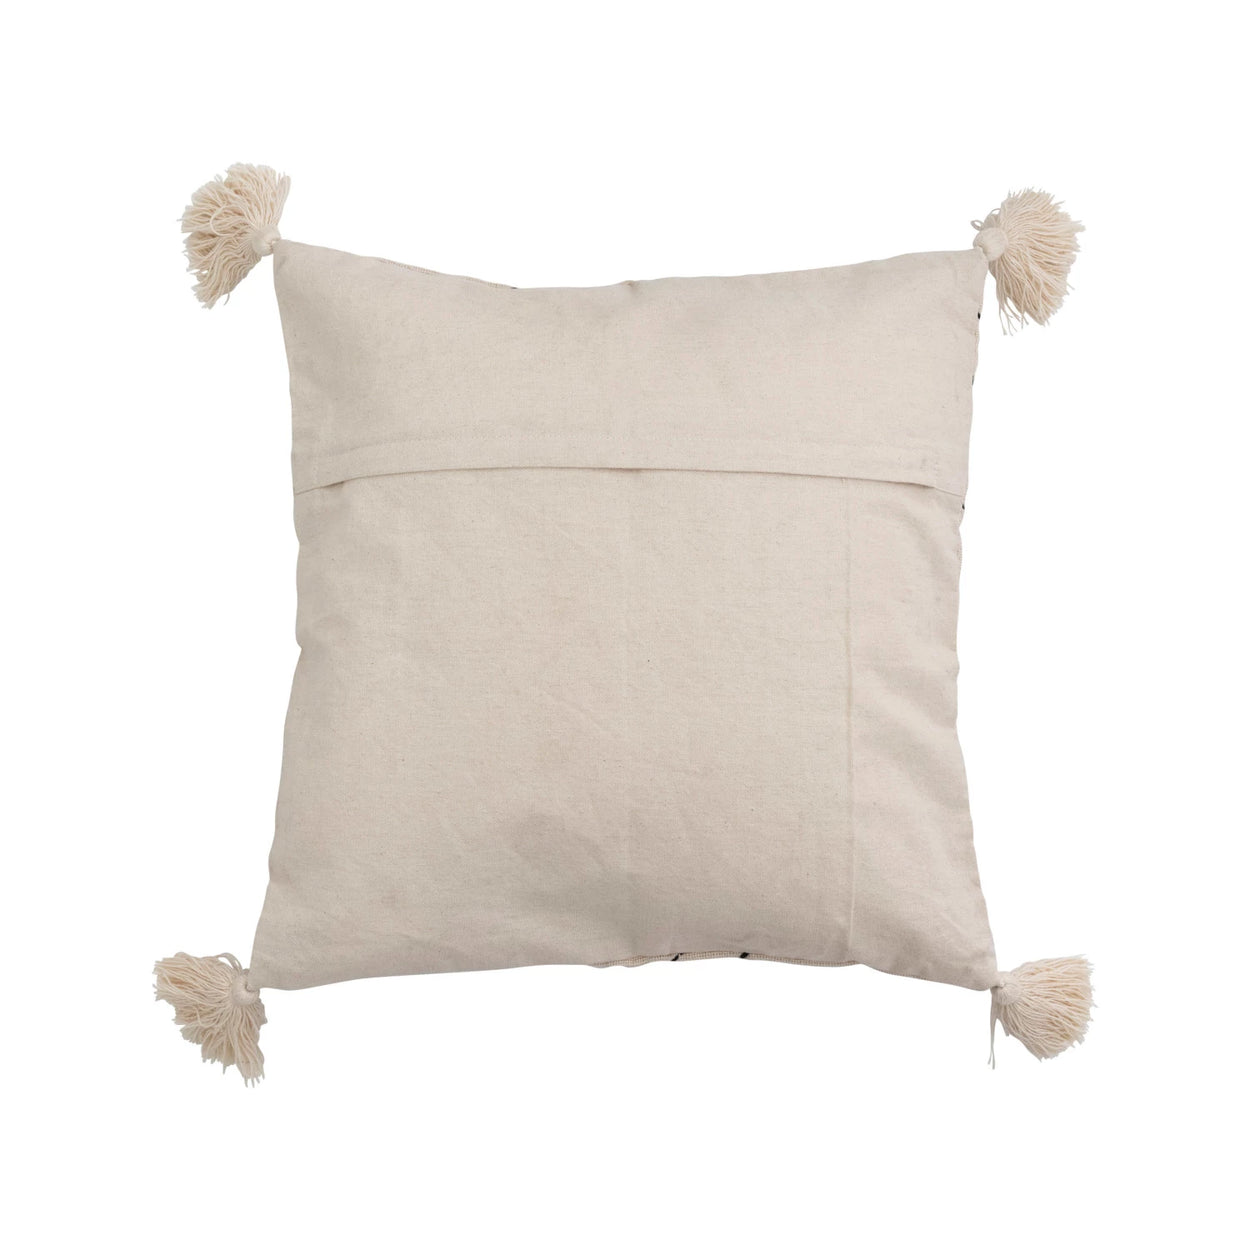 Cotton Blend Pillow With Embroidery & Tassels